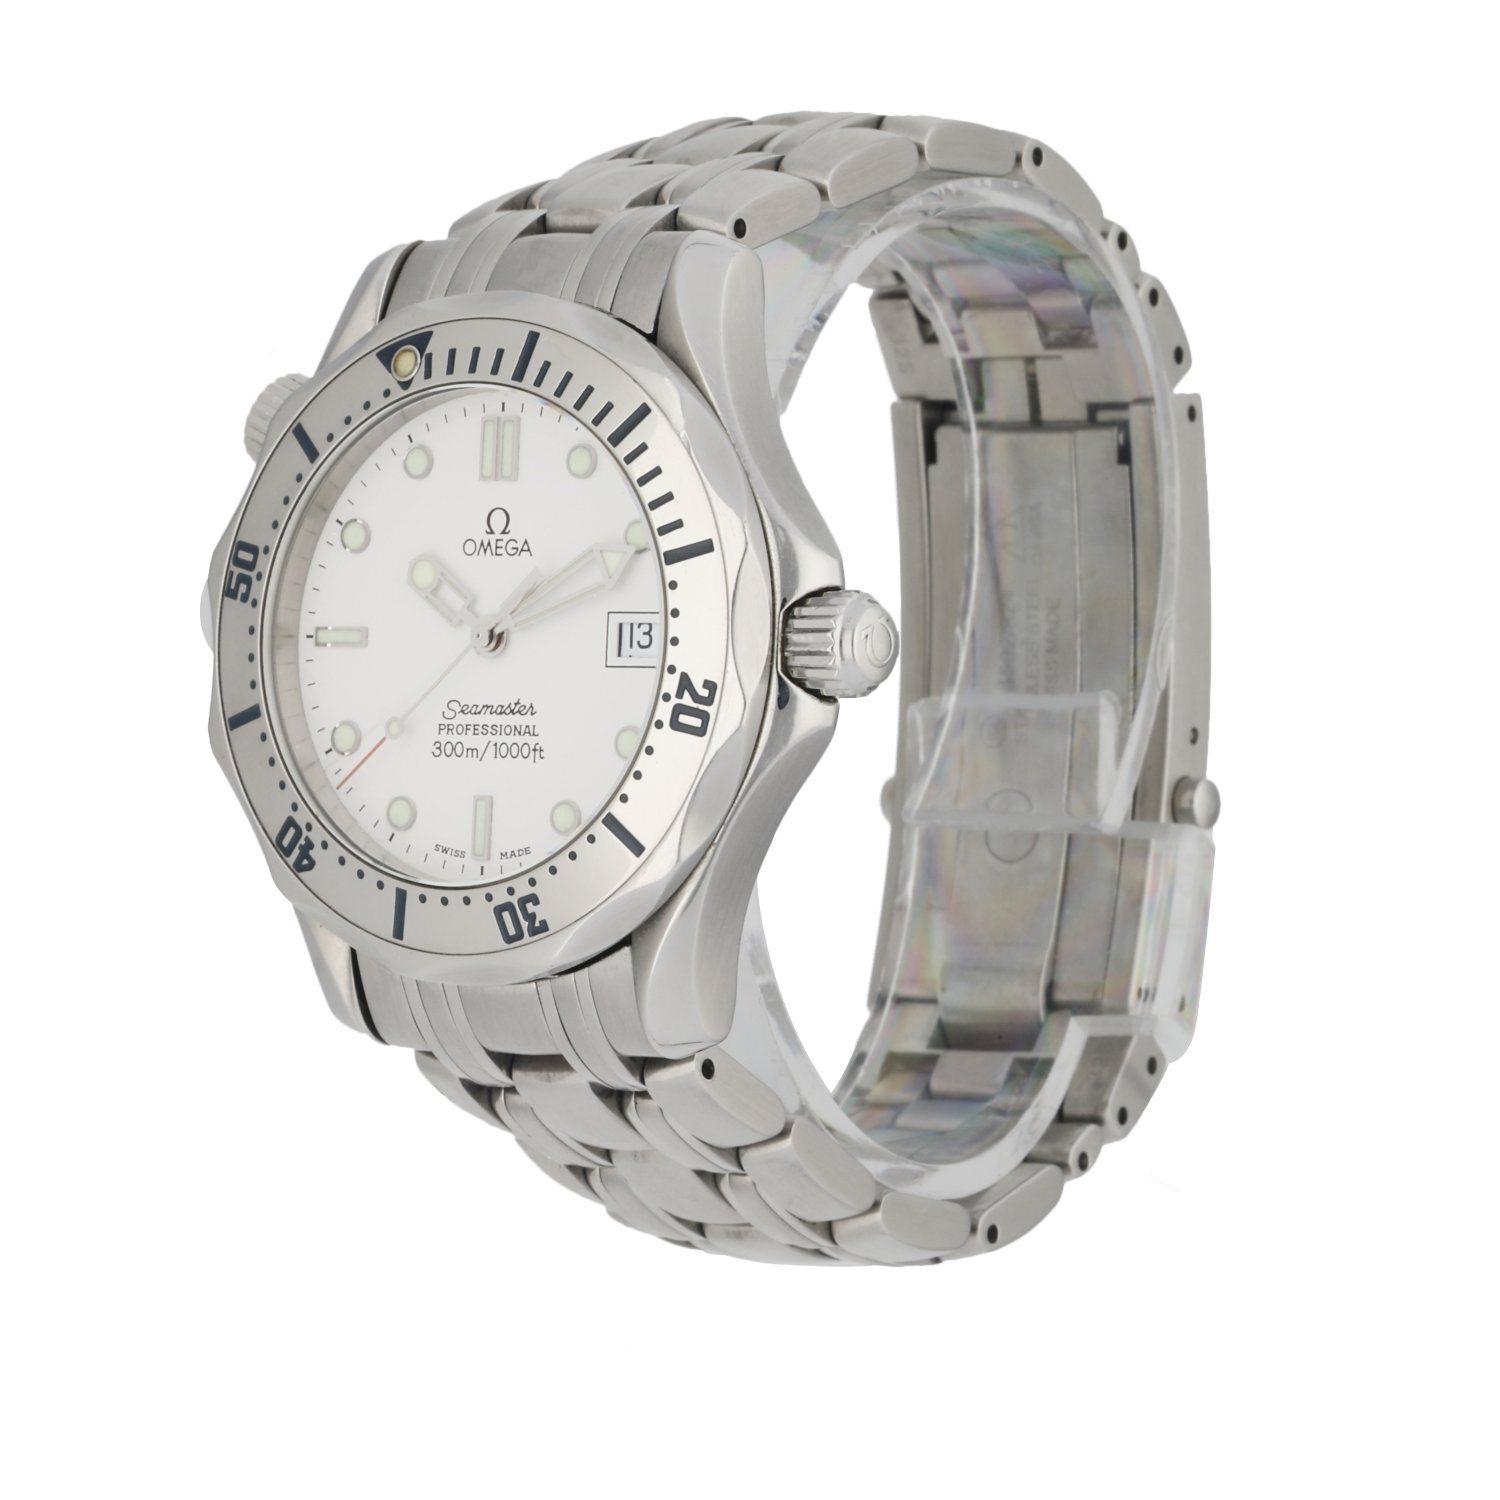 Omega Seamaster 2562.20.00 men's watch. 36mm stainless steel case with unidirectional rotating bezel with bezel insert. White dial with luminous steel hands and luminous index and dot hour marker. Date display at 3 o'clock position. Stainless steel